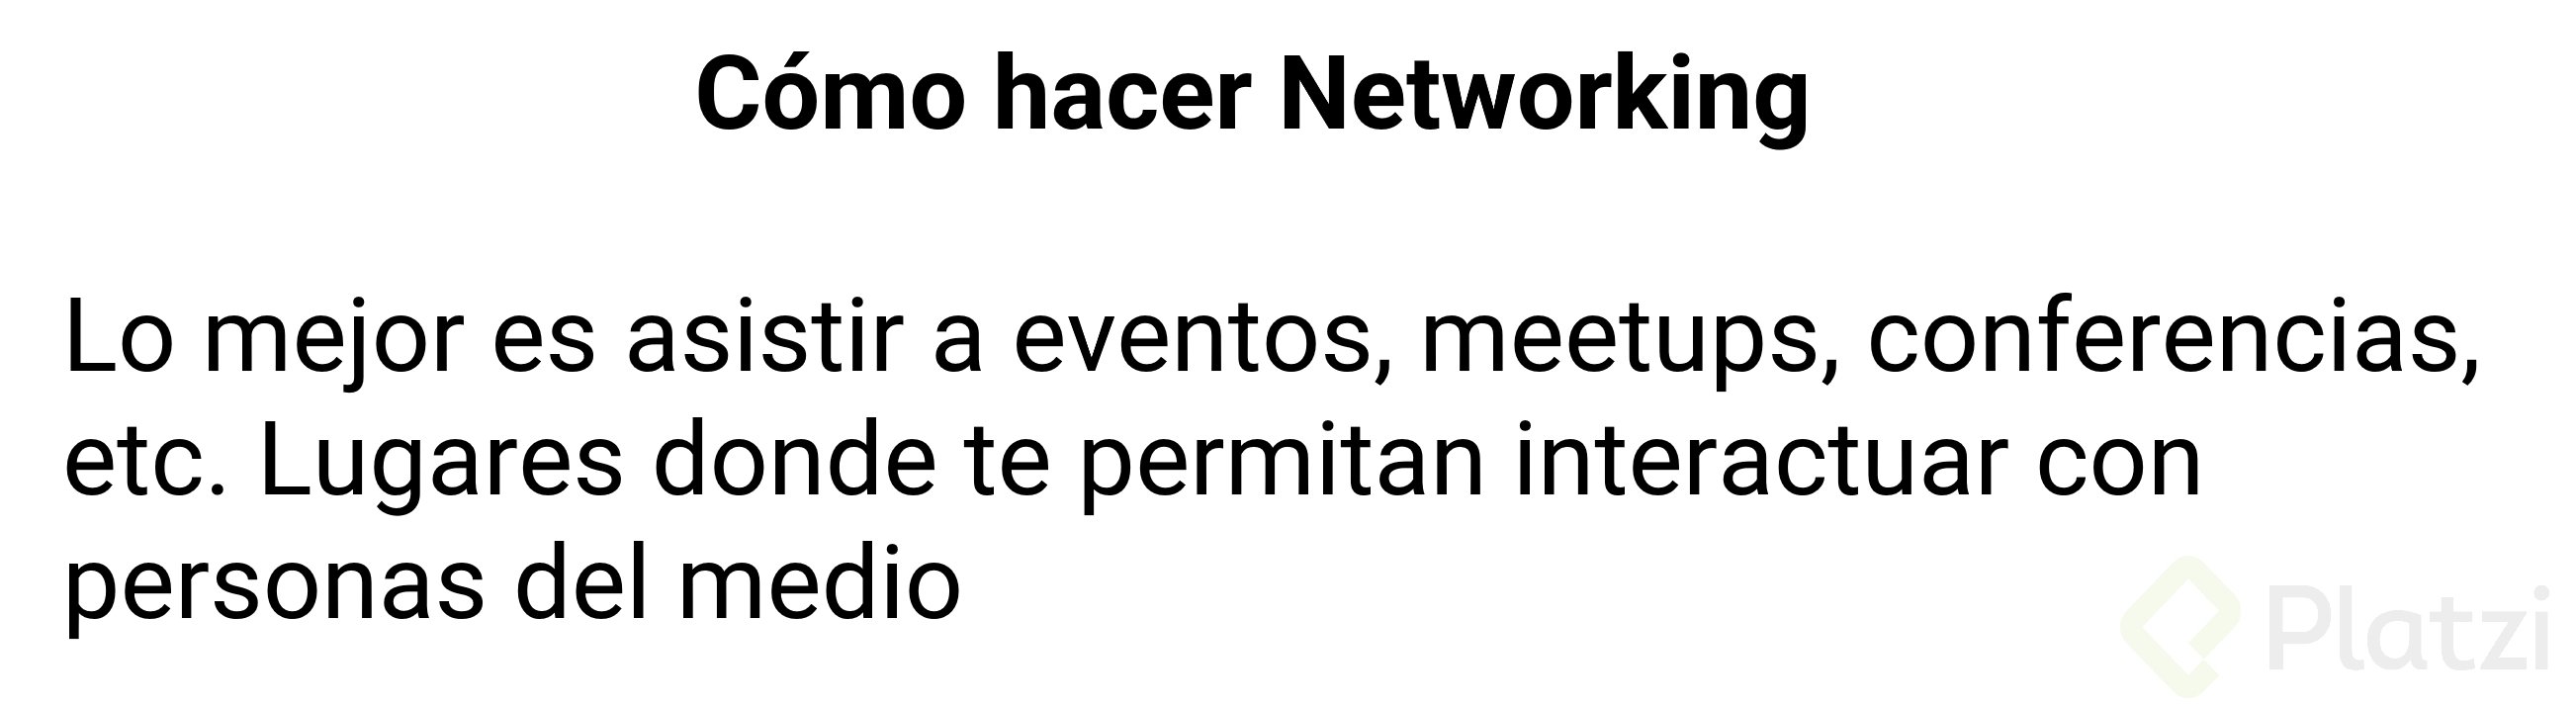 Cómo hacer Networking.png